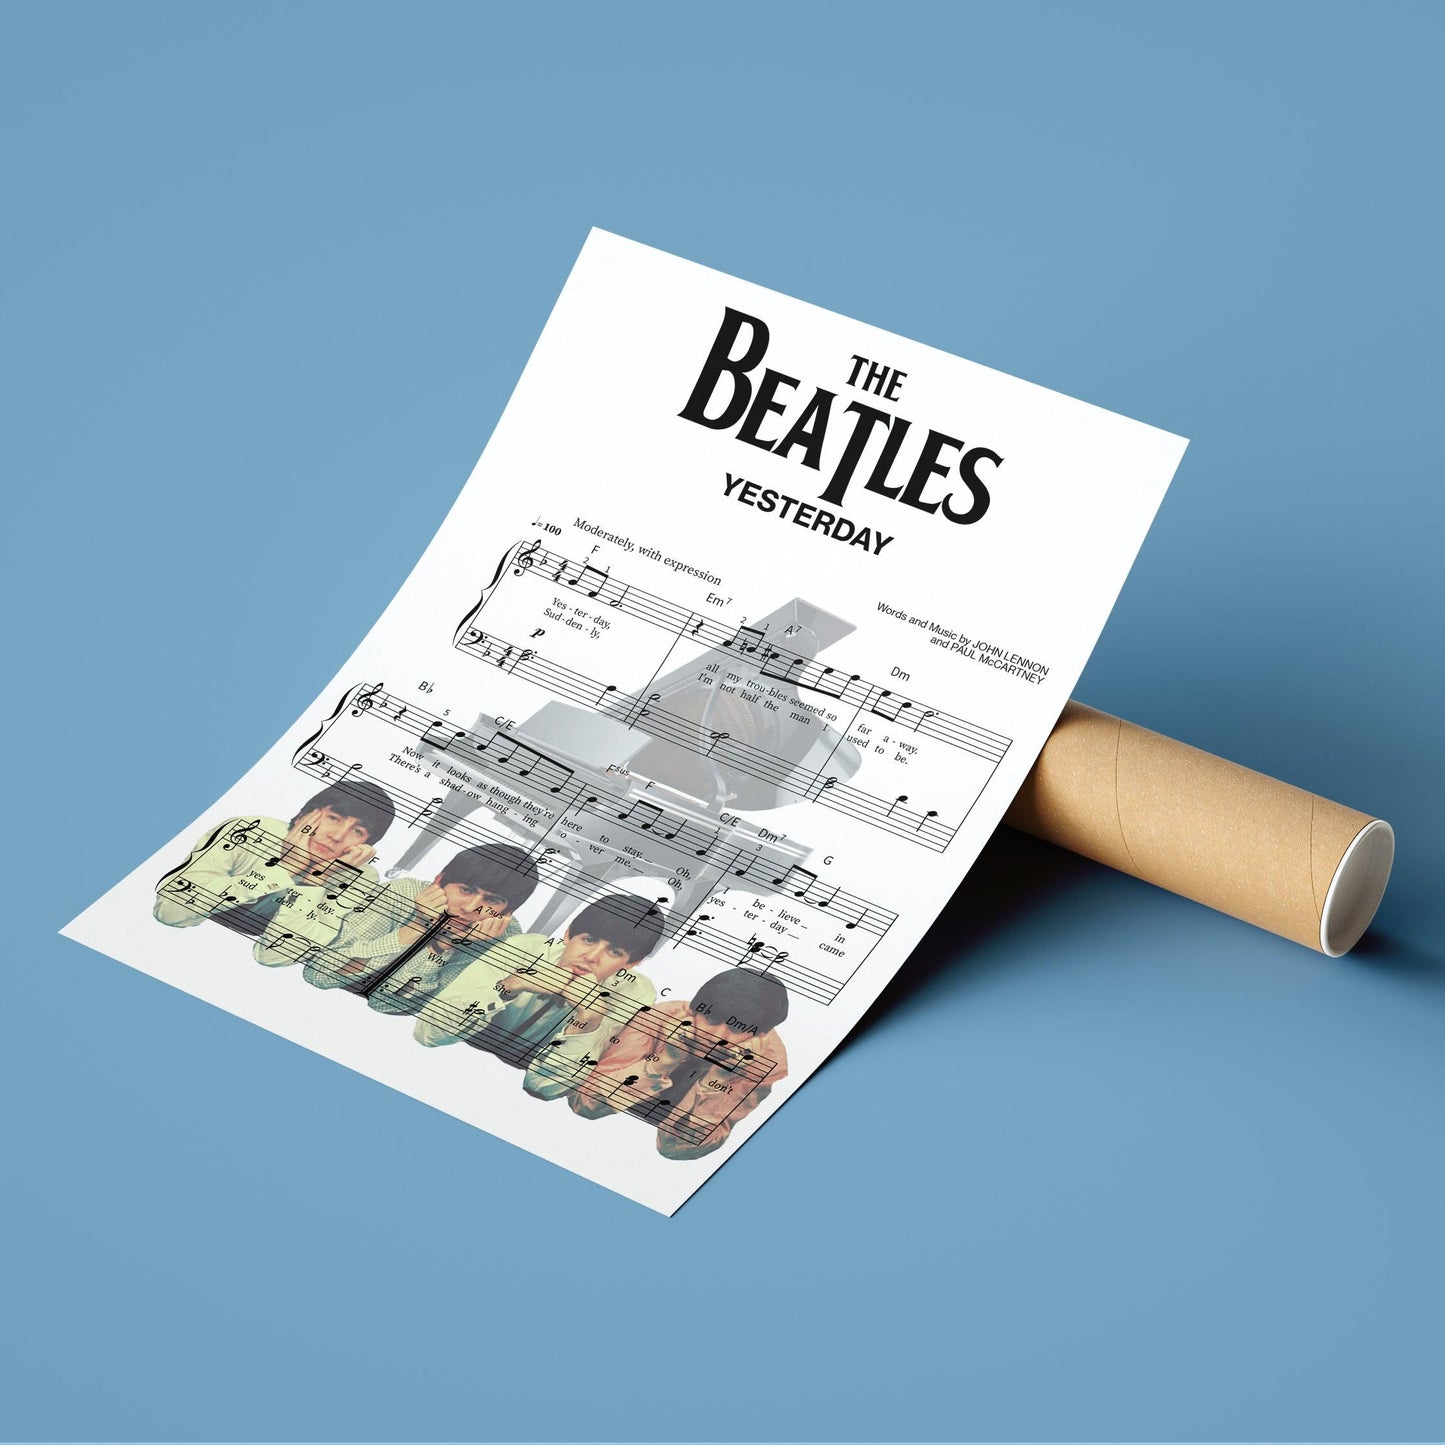 THE BEATLES - Yesterday Theme Song Print | Sheet Music Wall Art | Song Music Sheet Notes Print Everyone has a favorite song and now you can show the score as printed staff. The personal favorite song sheet print shows the song chosen as the score. 